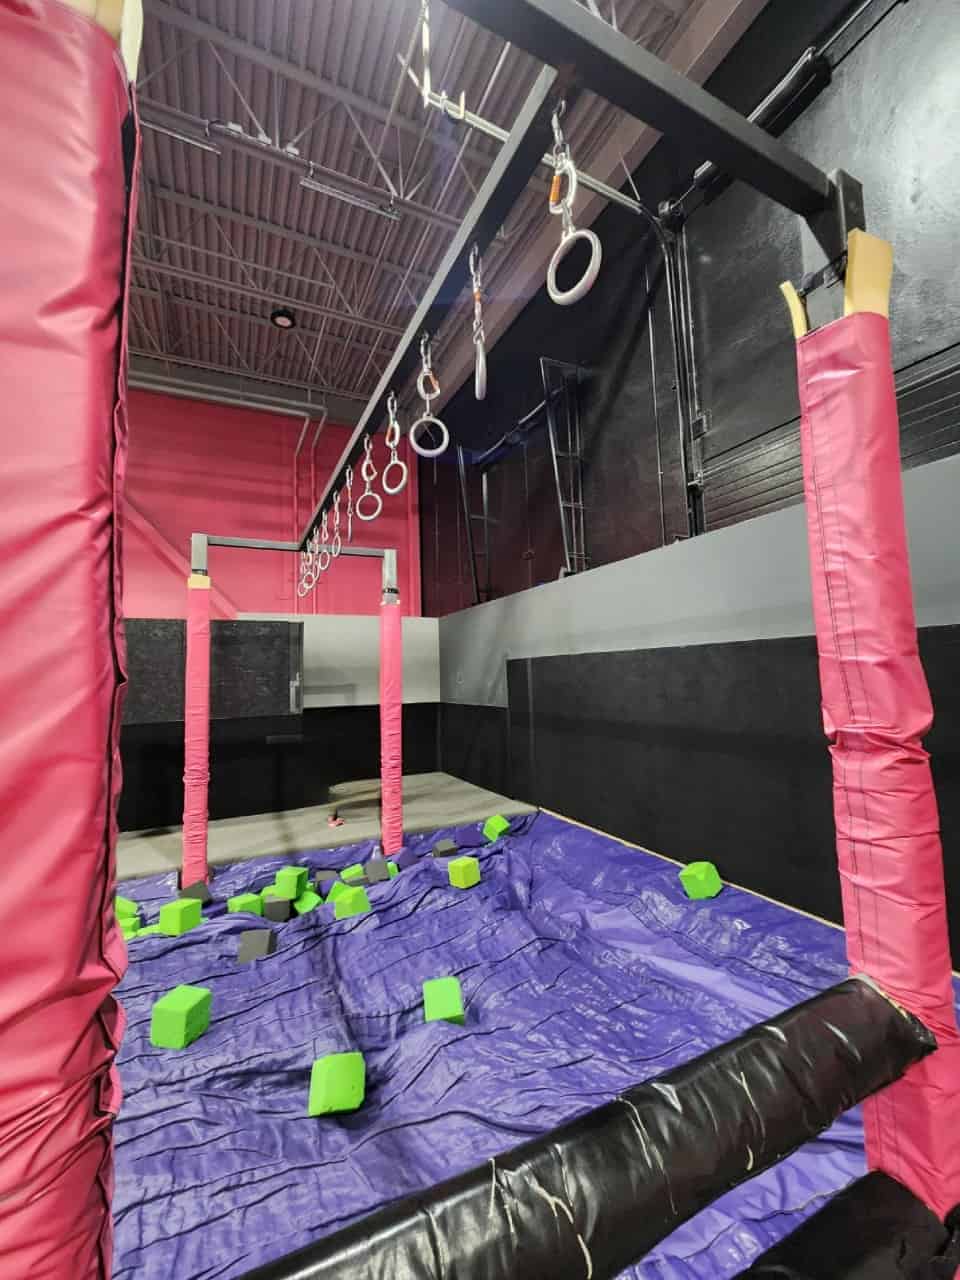 Would You Try the Ninja Course? - With so many different areas to explore, don't miss the Ninja course! Luckily, a nice soft landing as you fall down below.